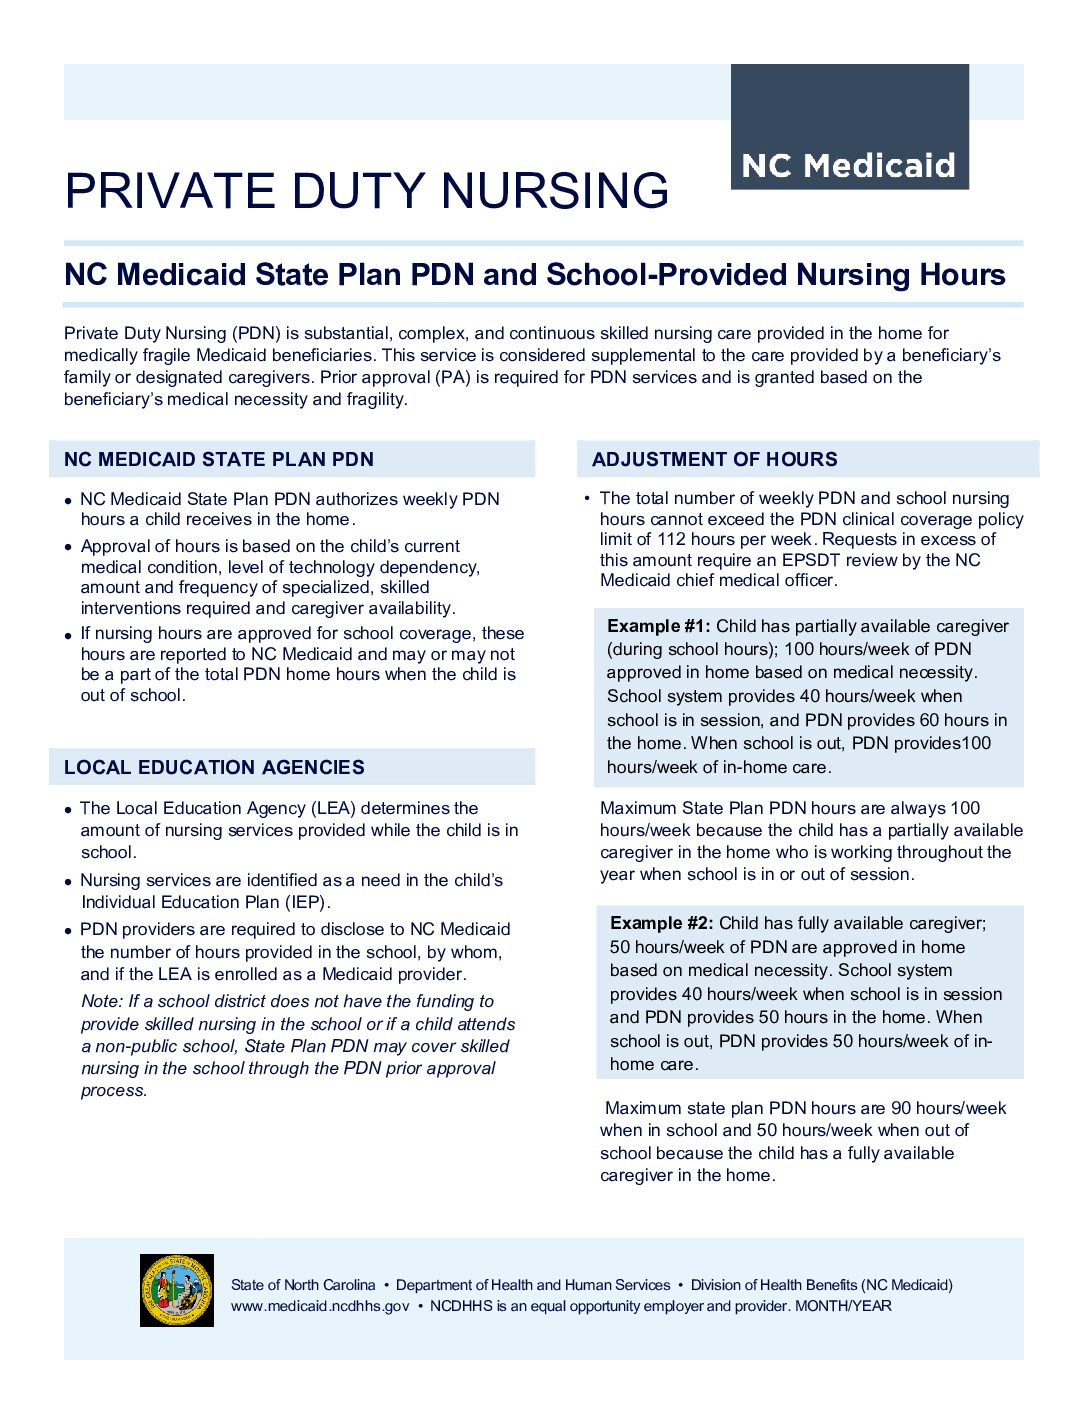 NC Medicaid PDN and School Provided Nursing Hours